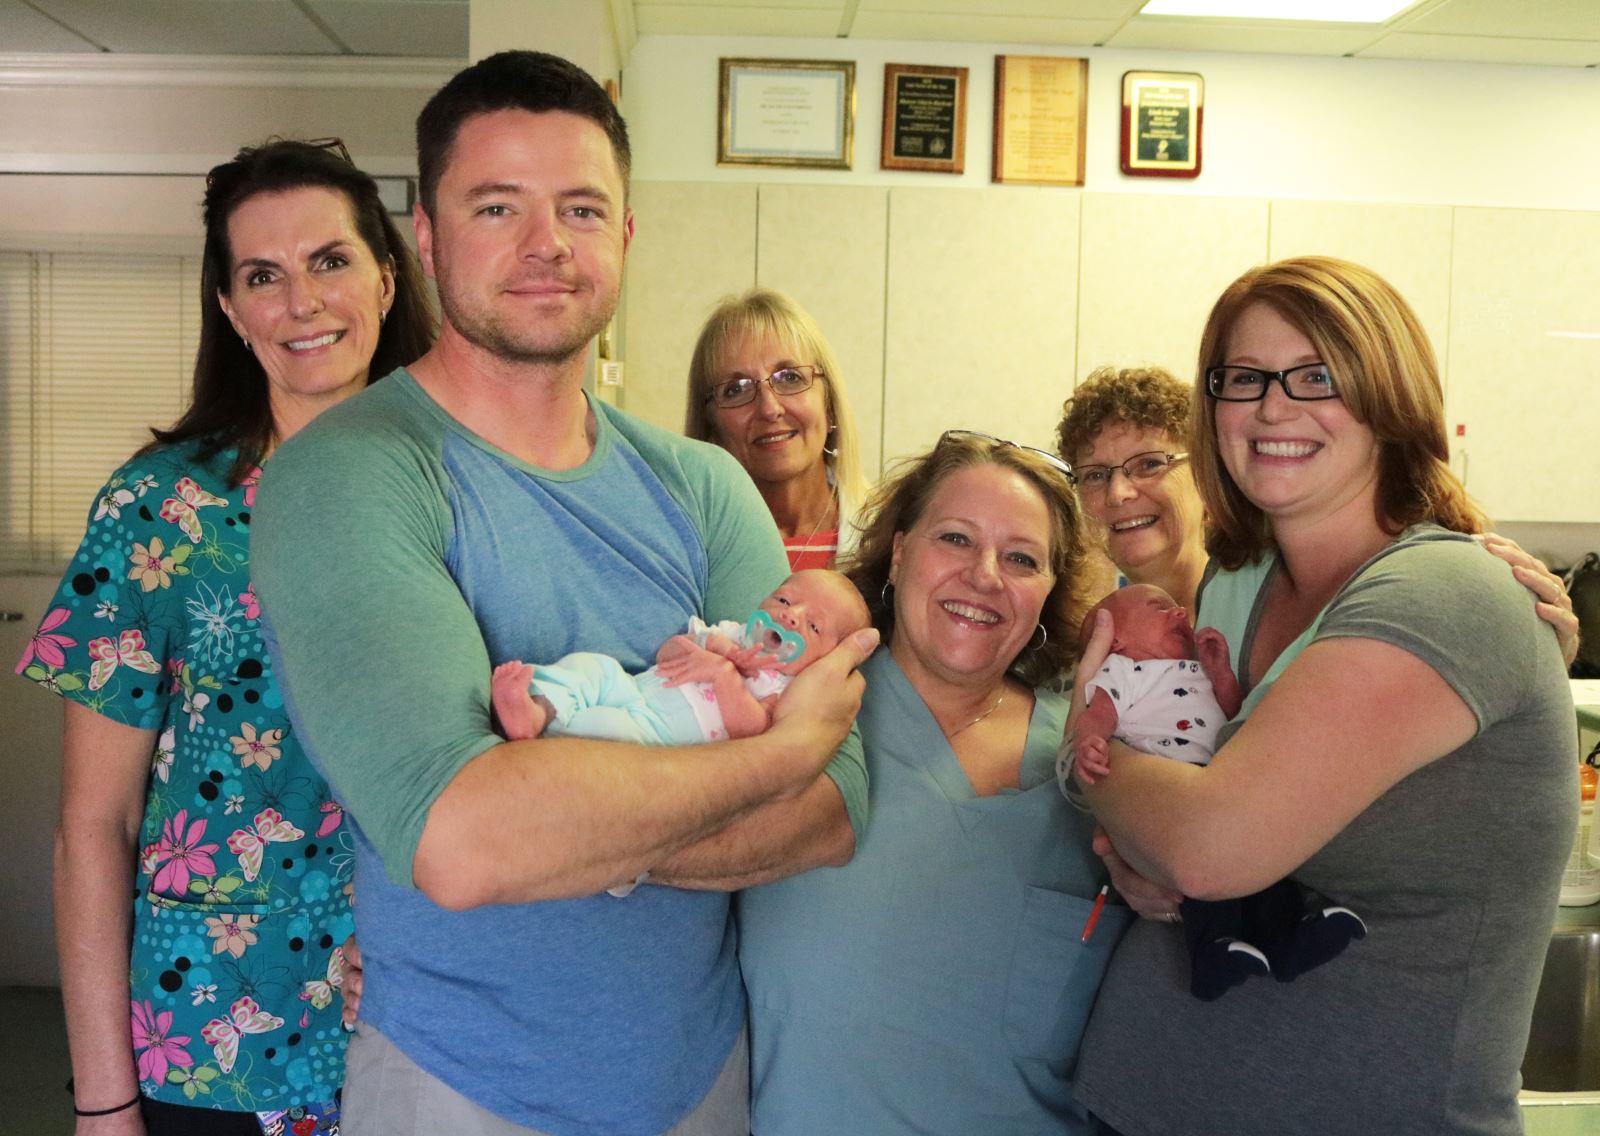 A Father and Mother holding their newborn twins, joined by staff of hospital